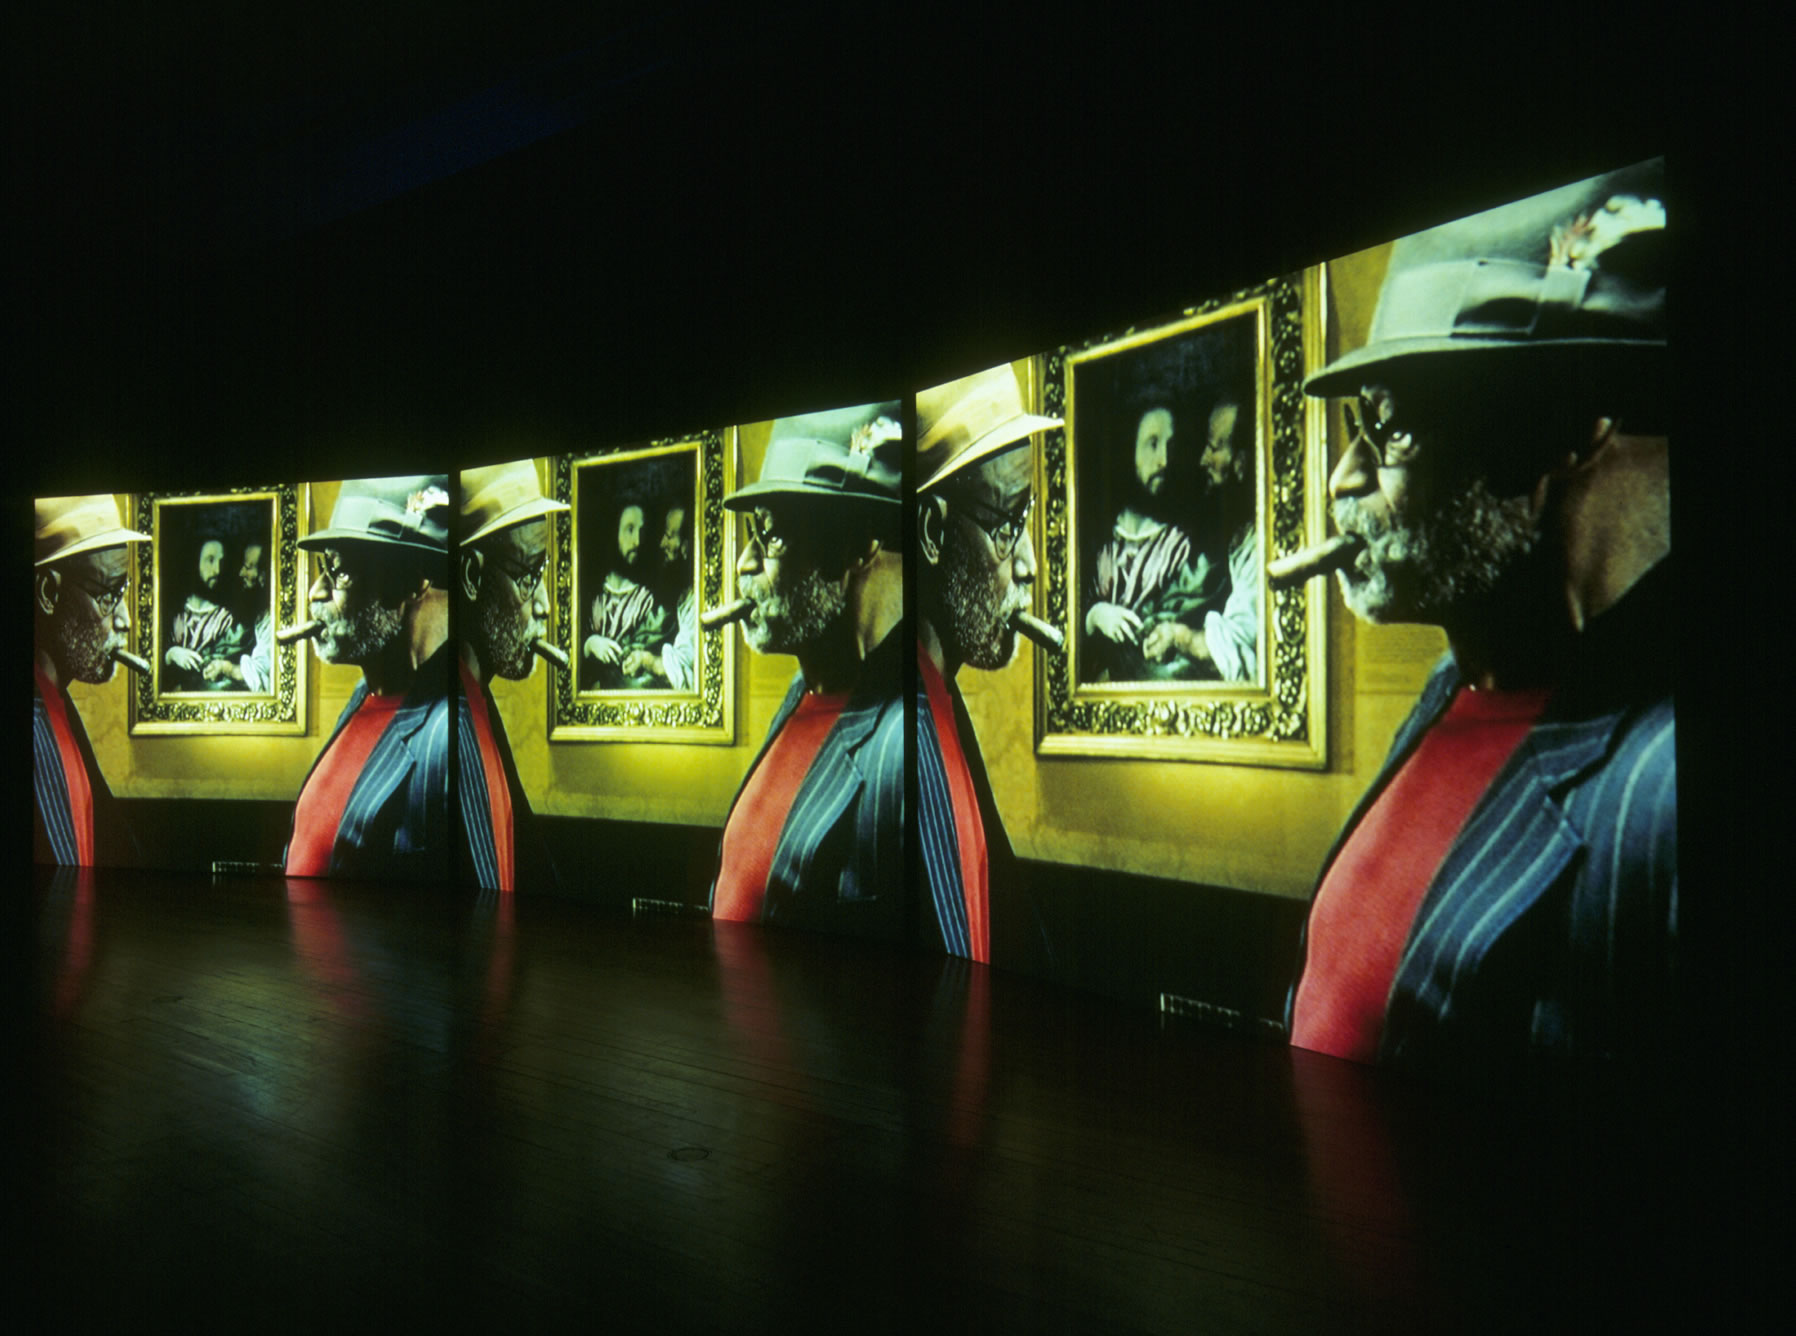 Image: Isaac Julien. Baltimore. 2003. The Baltimore Museum of Art: Purchase with exchange funds from the Pearlstone Family Fund and partial gift of The Andy Warhol Foundation for the Visual Arts, Inc., BMA 2018.83. © Isaac Julien. Courtesy the artist, Victoria Miro Gallery, and Metro Pictures, New York. Photography by Werner Maschmann.